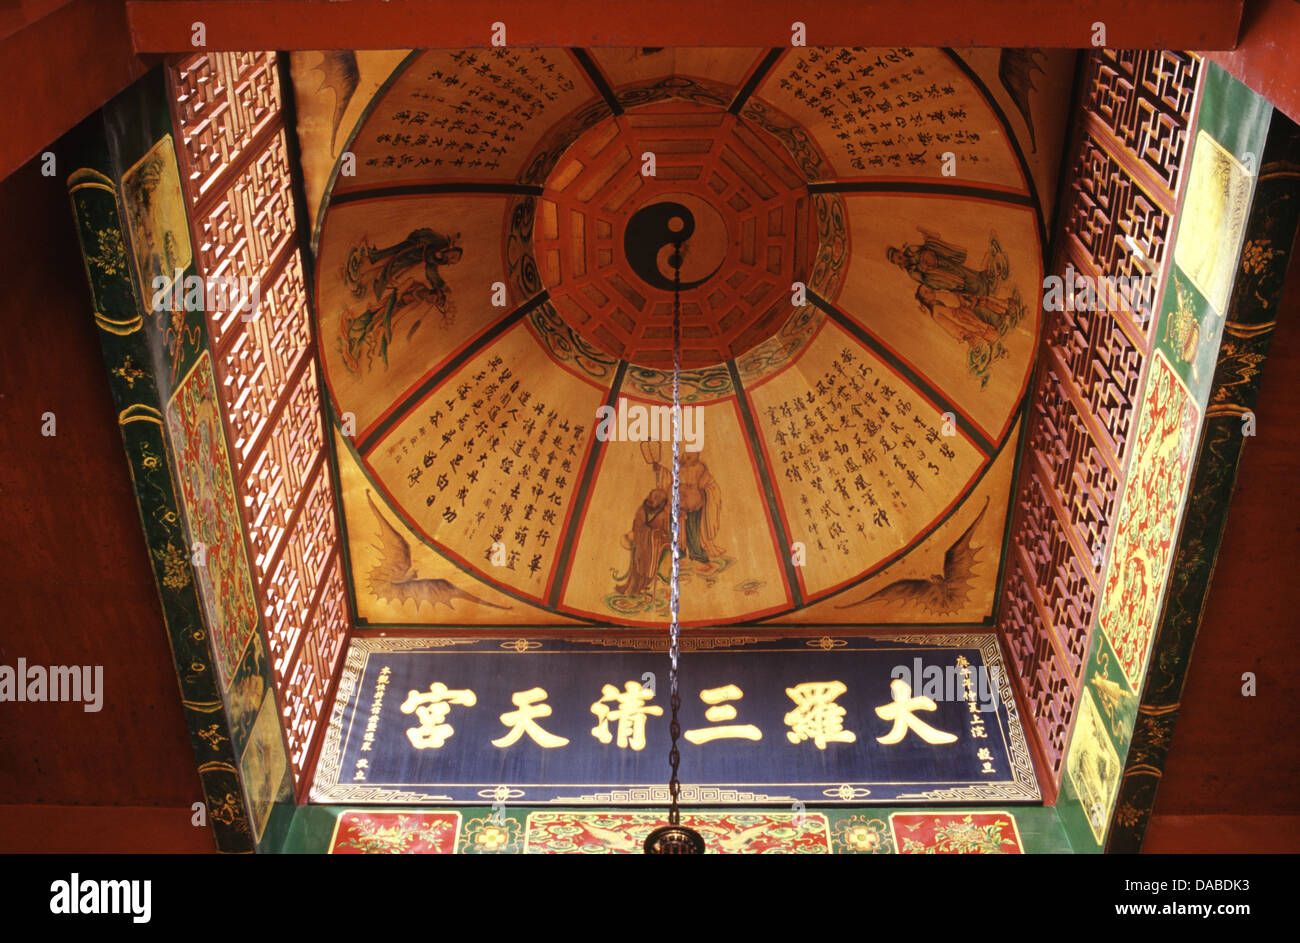 Domed ceiling of the 7th century Daoist Xuandu Si temple with the Bagua diagram in Mount Heng or Hengshan mountain located in Hunan province and known as Nanyue the southern mountain of the Five Great Mountains of China Stock Photo